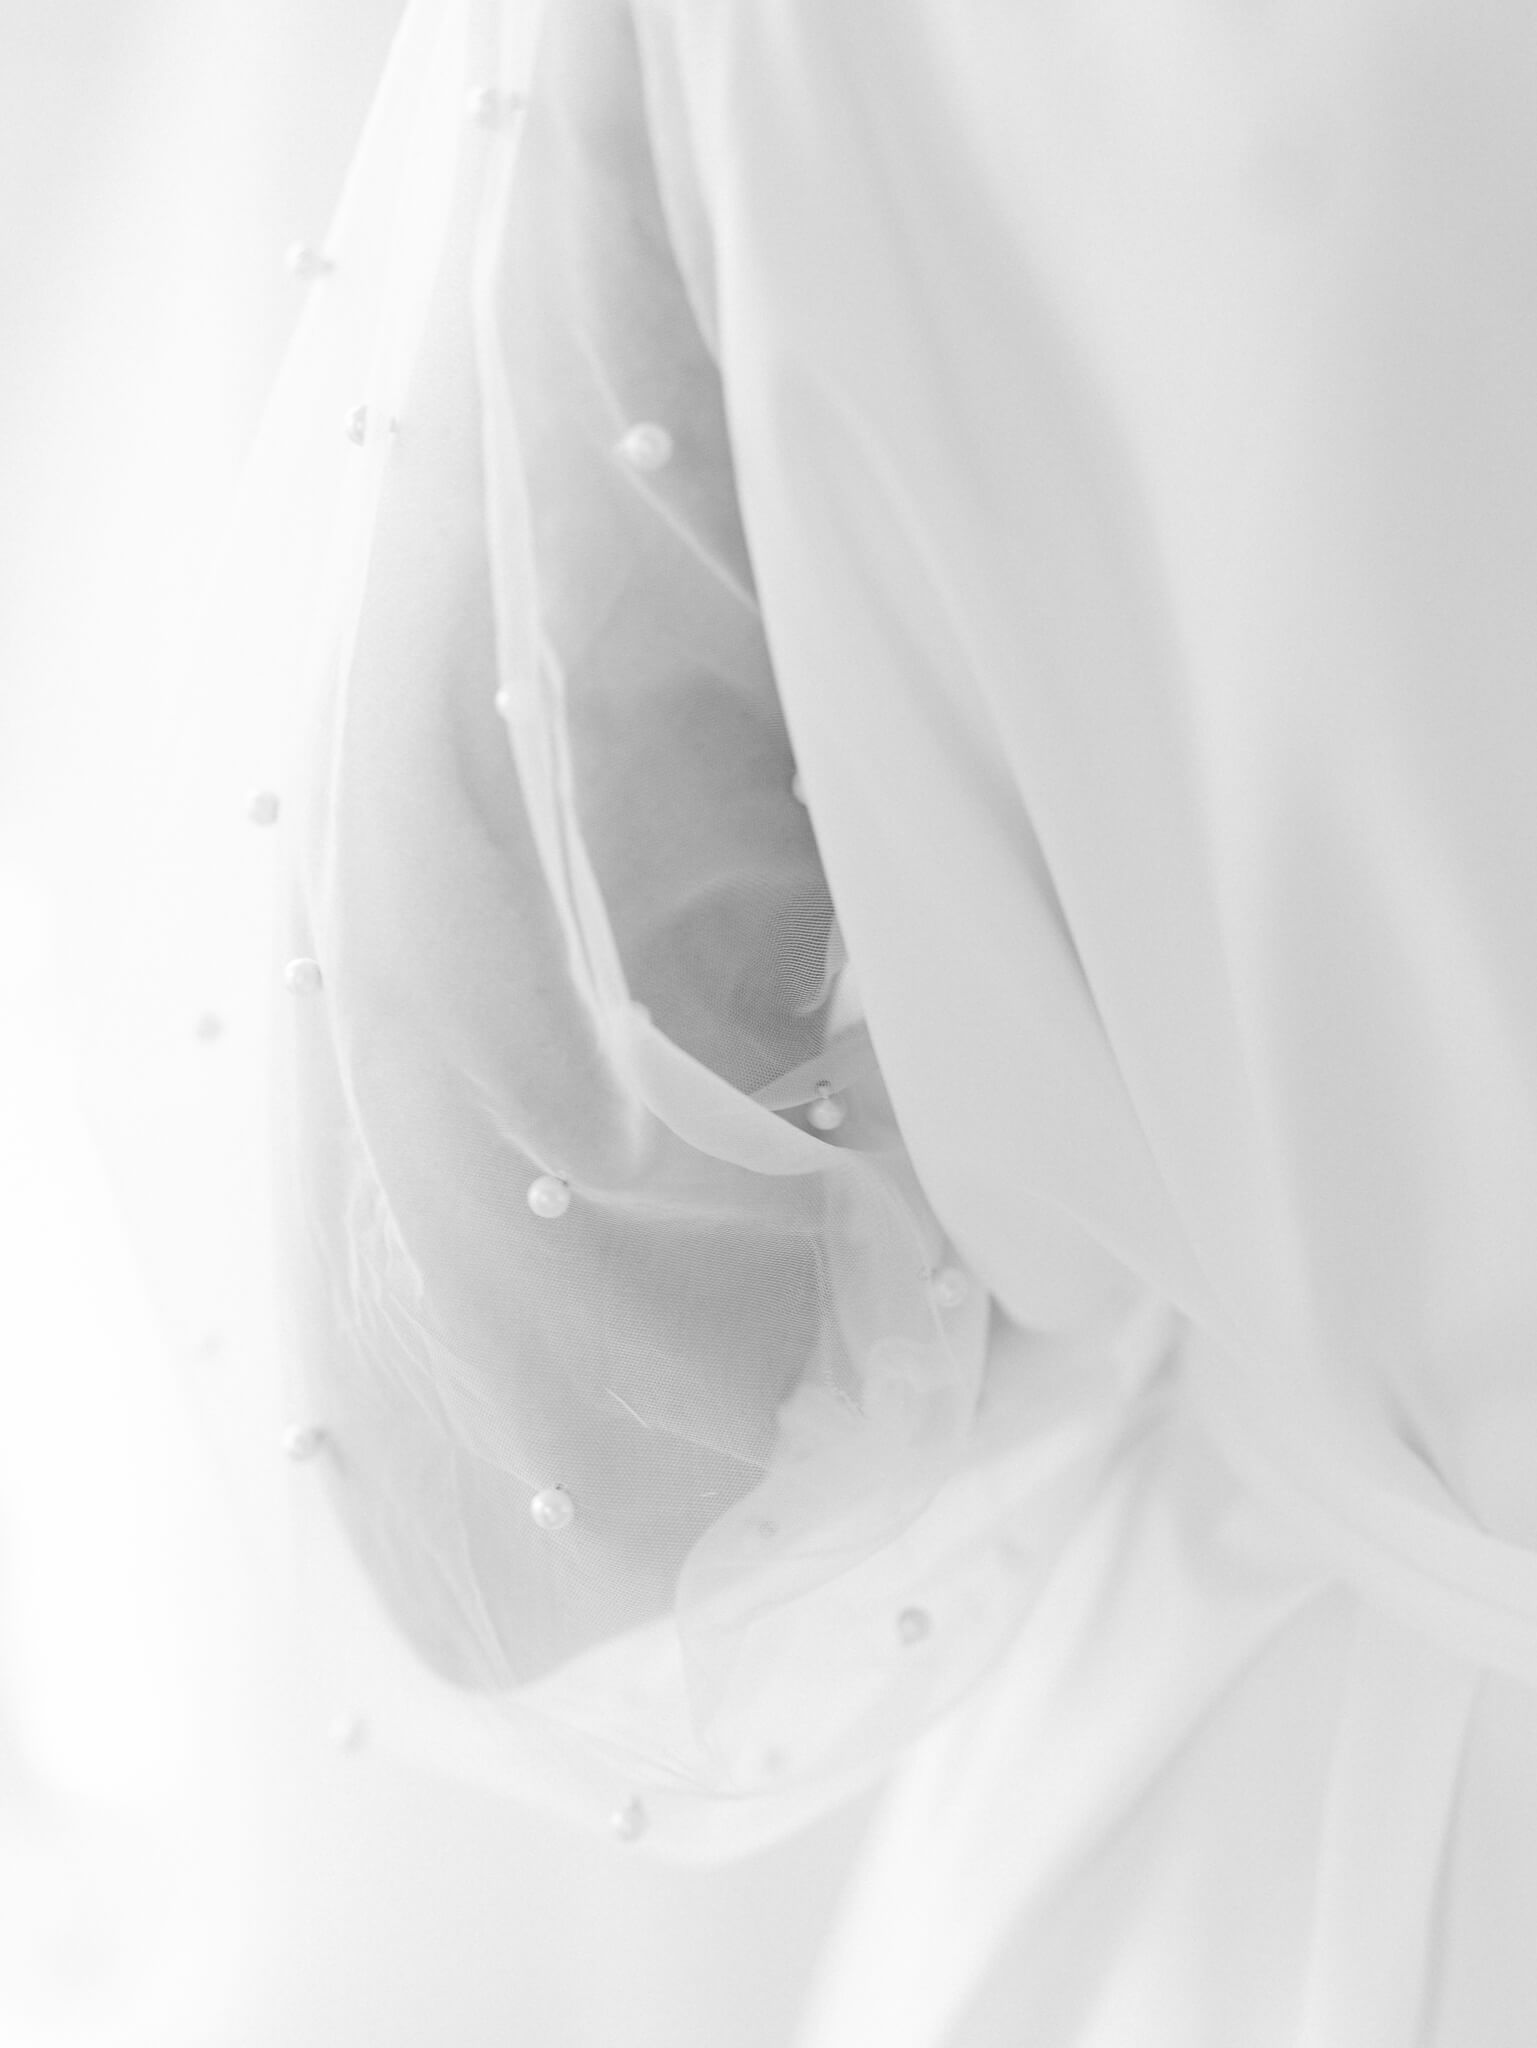 Close up of the pearl detail on a bride's robe in black and white.